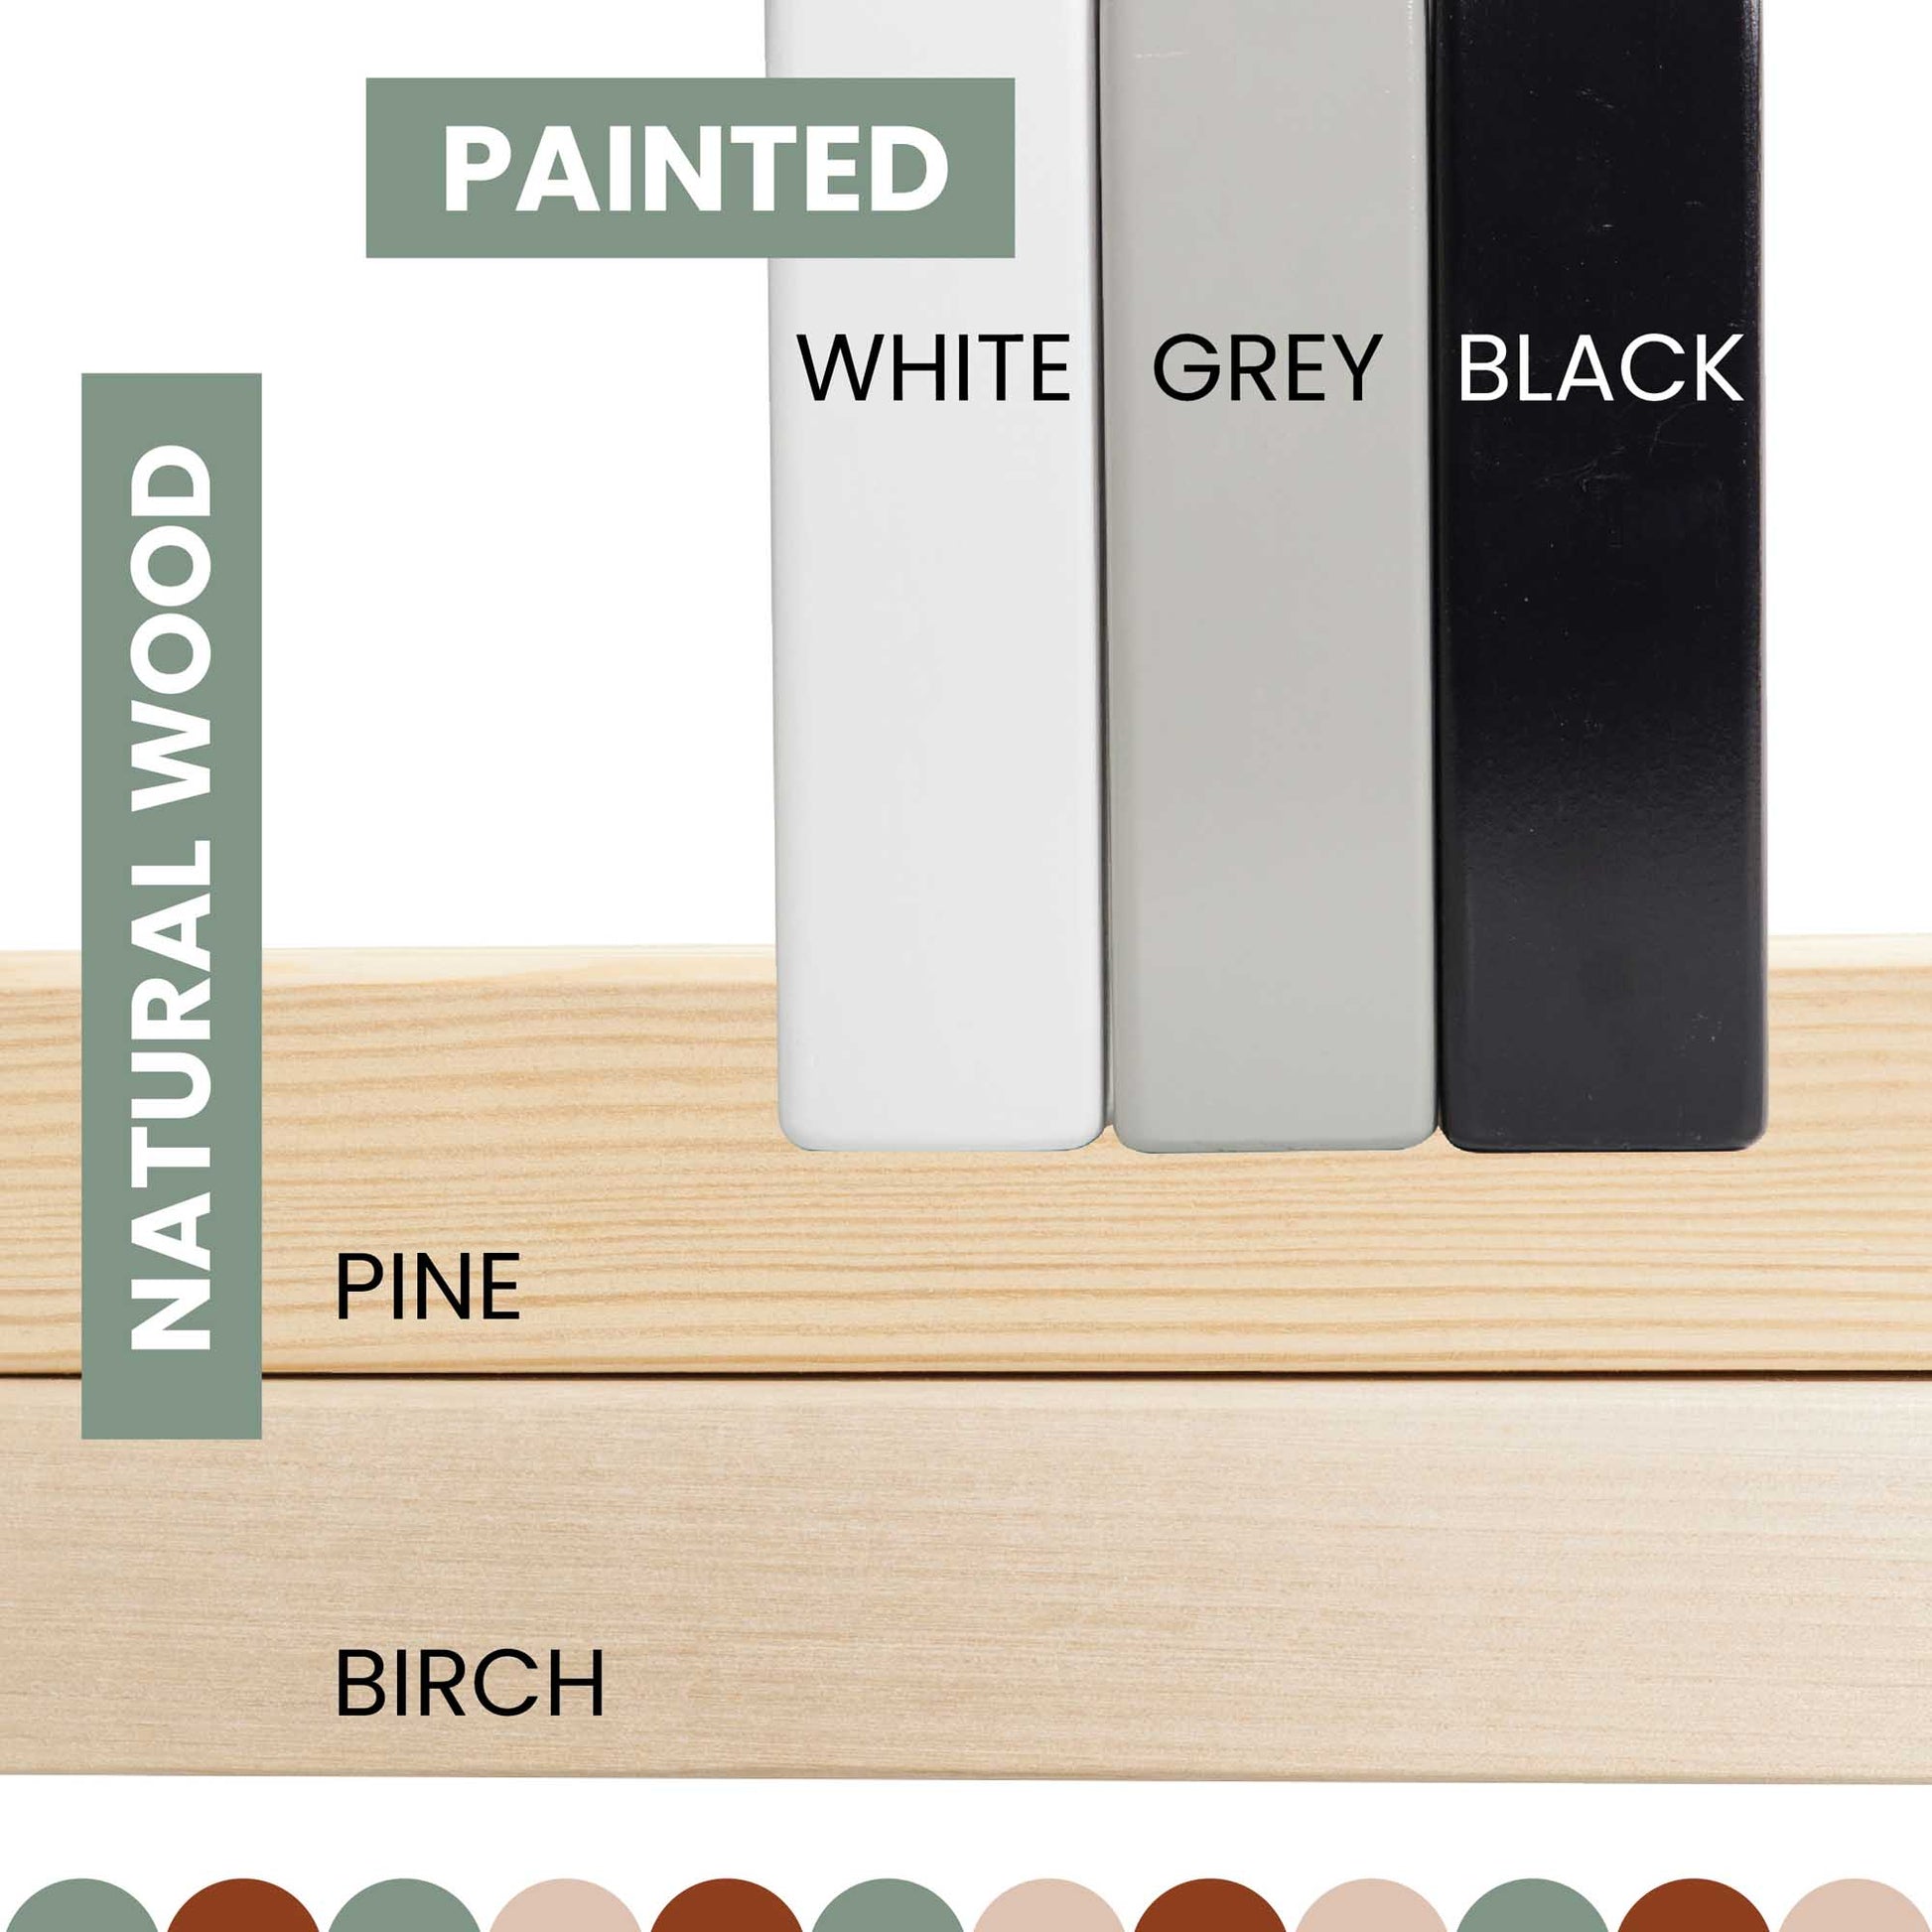 The paint colors for a low platform bed and Kids' house-frame bed with a picket fence headboard.